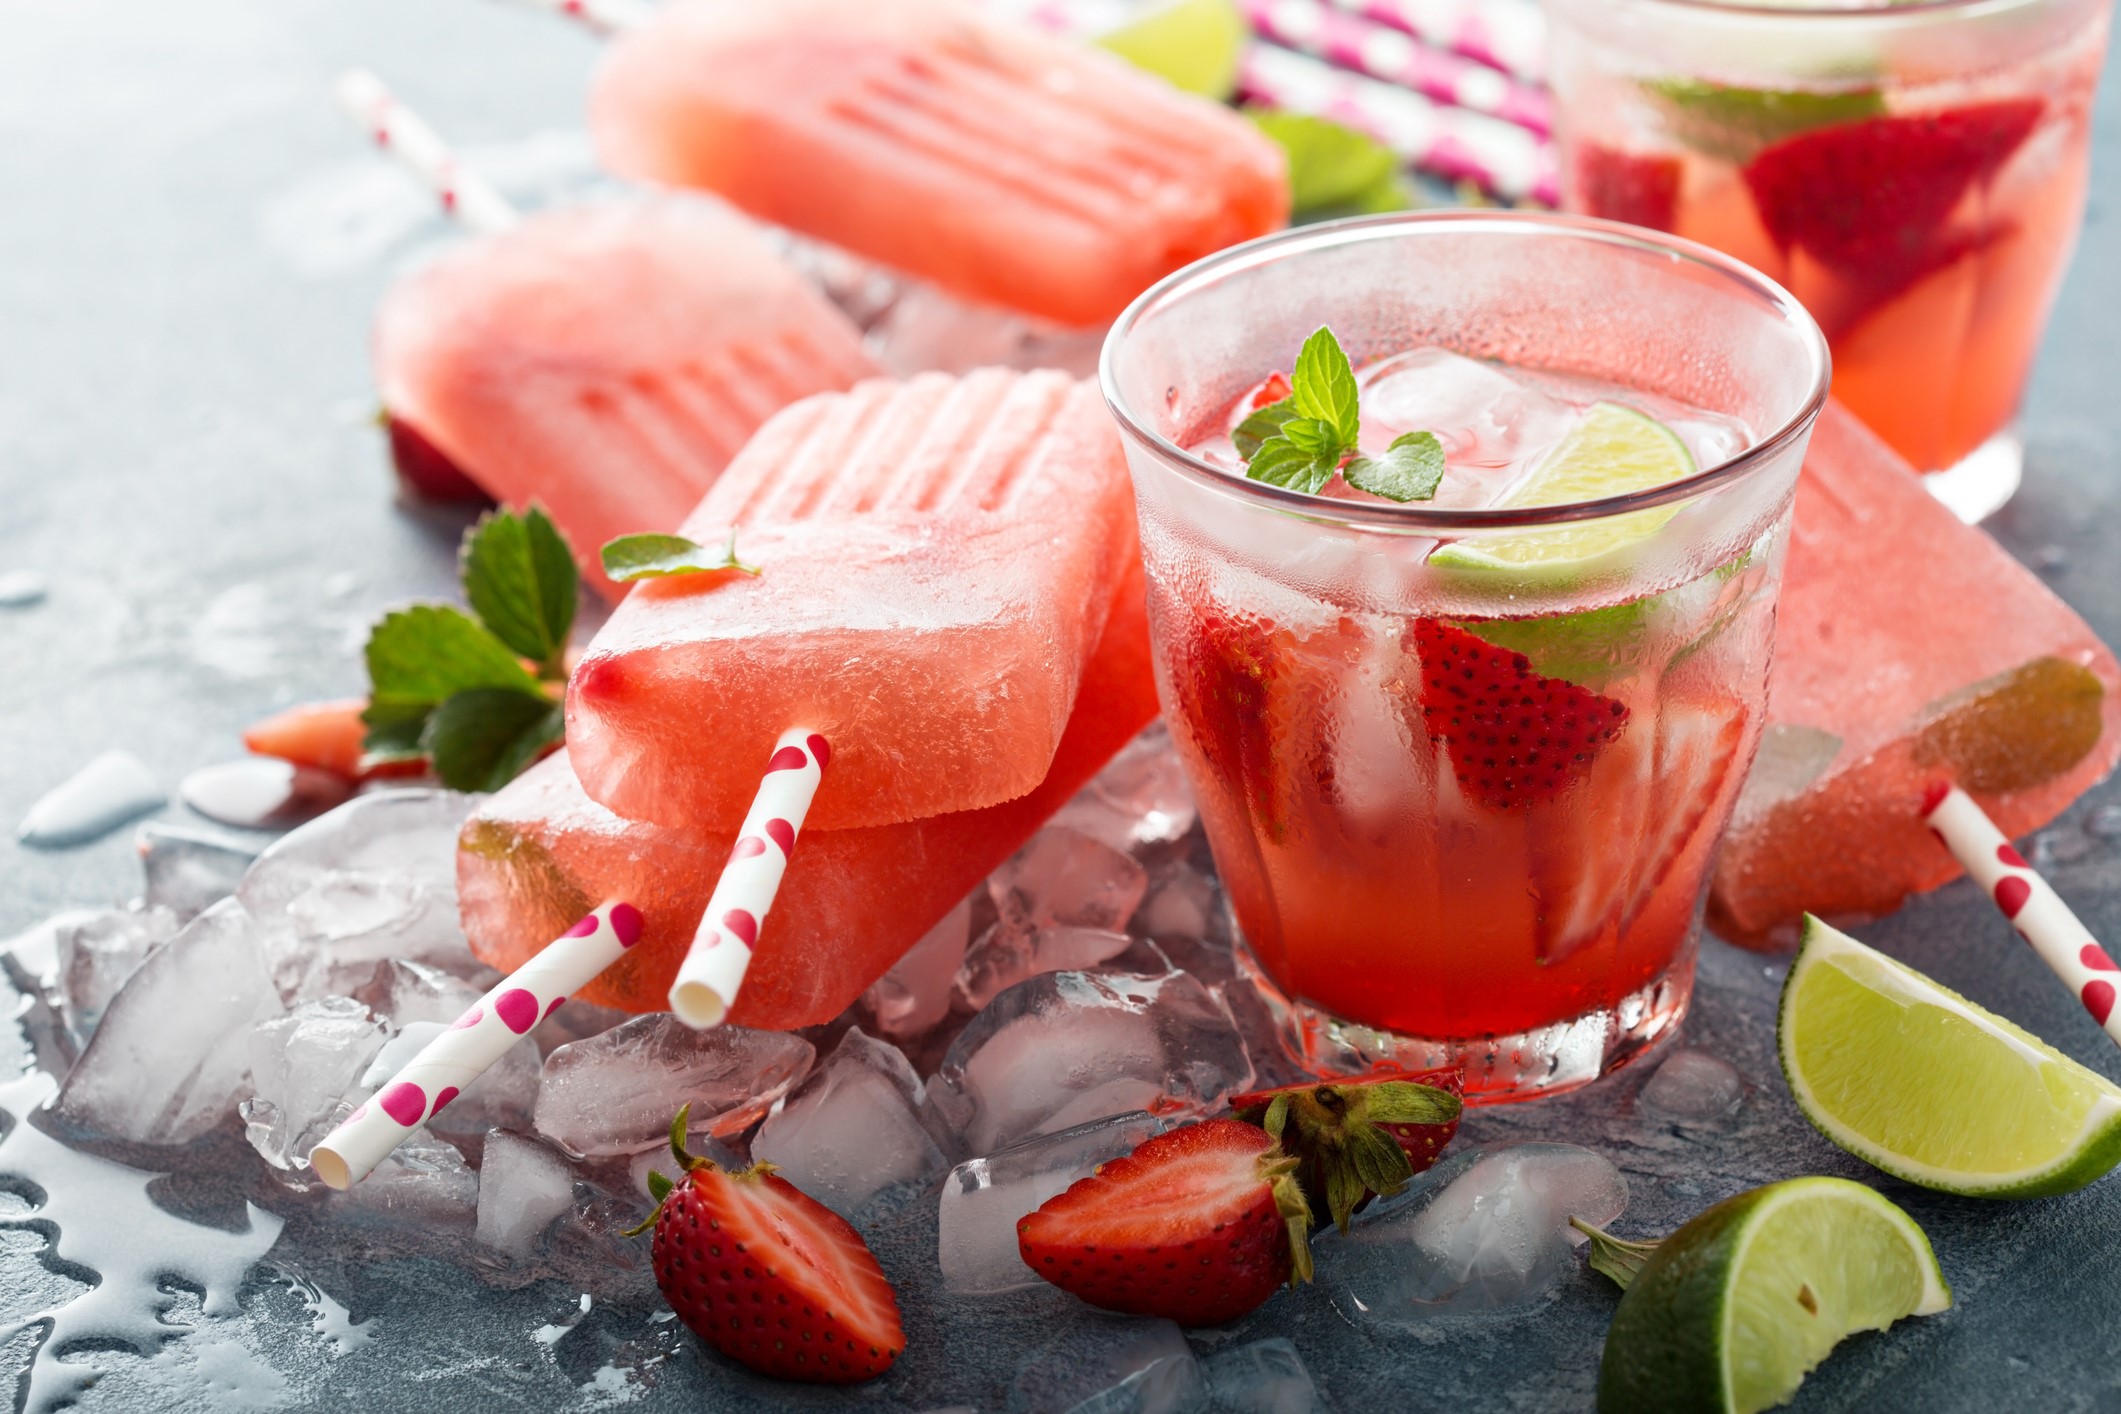 https://www.themanual.com/wp-content/uploads/sites/9/2021/08/strawberry-mojito-popsicles.jpg?fit=800%2C800&p=1